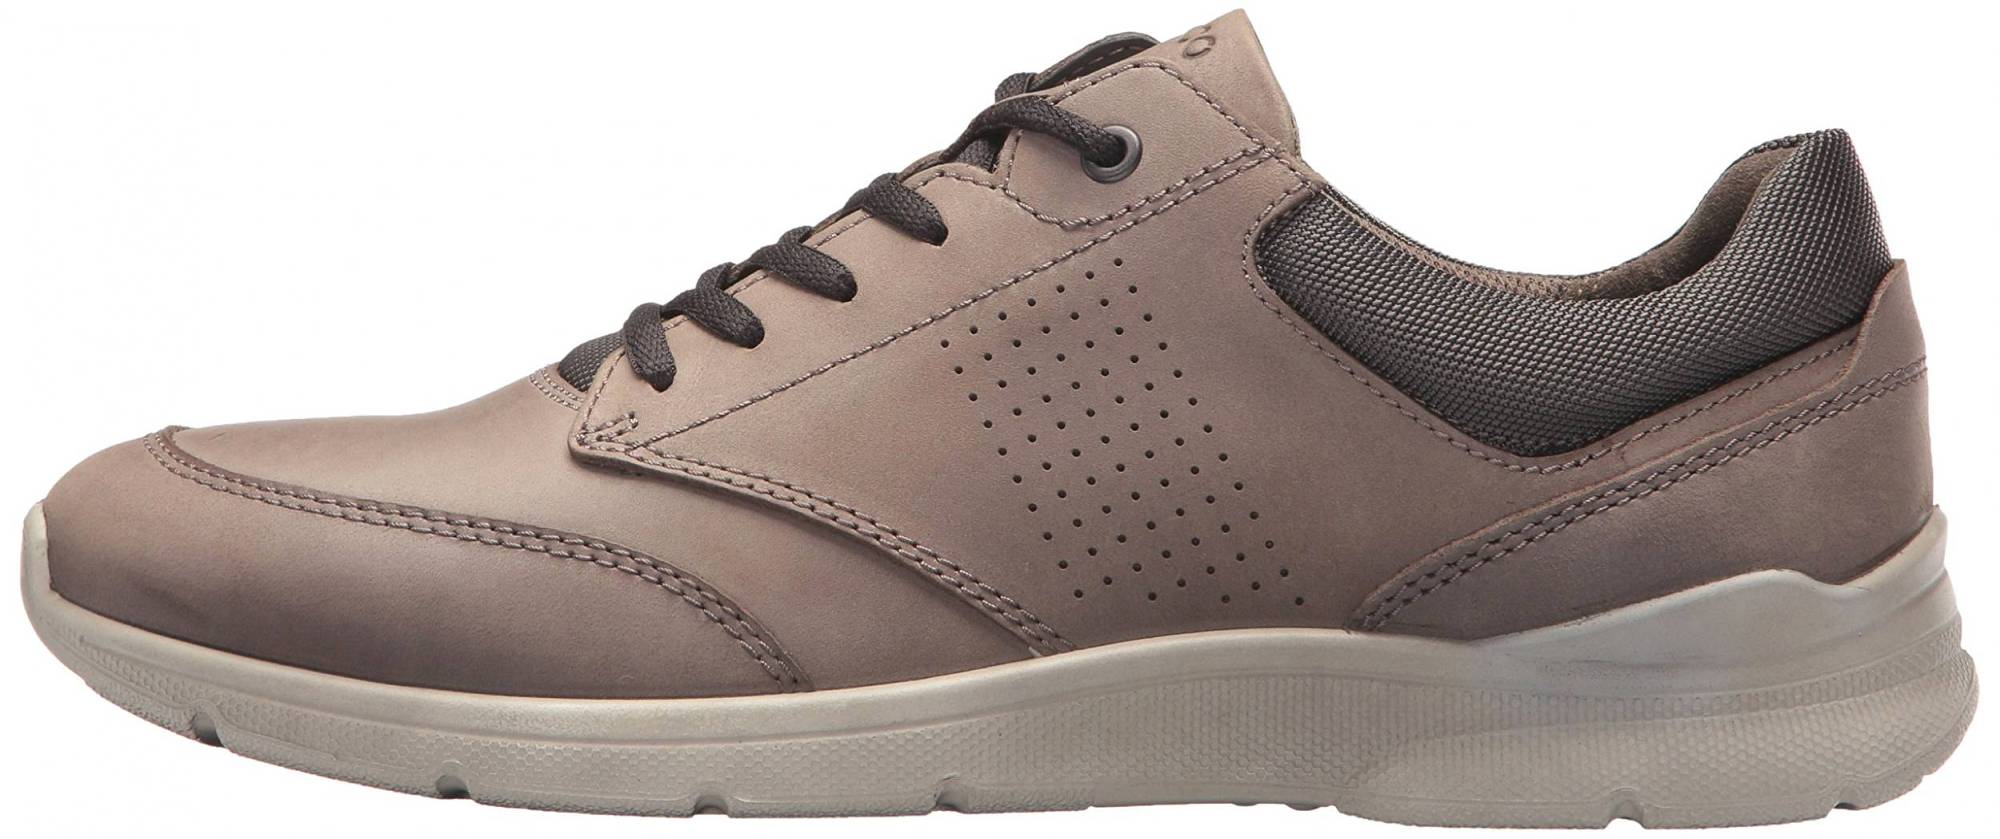 Ecco Irving Casual Tie – Shoes Reviews & Reasons To Buy